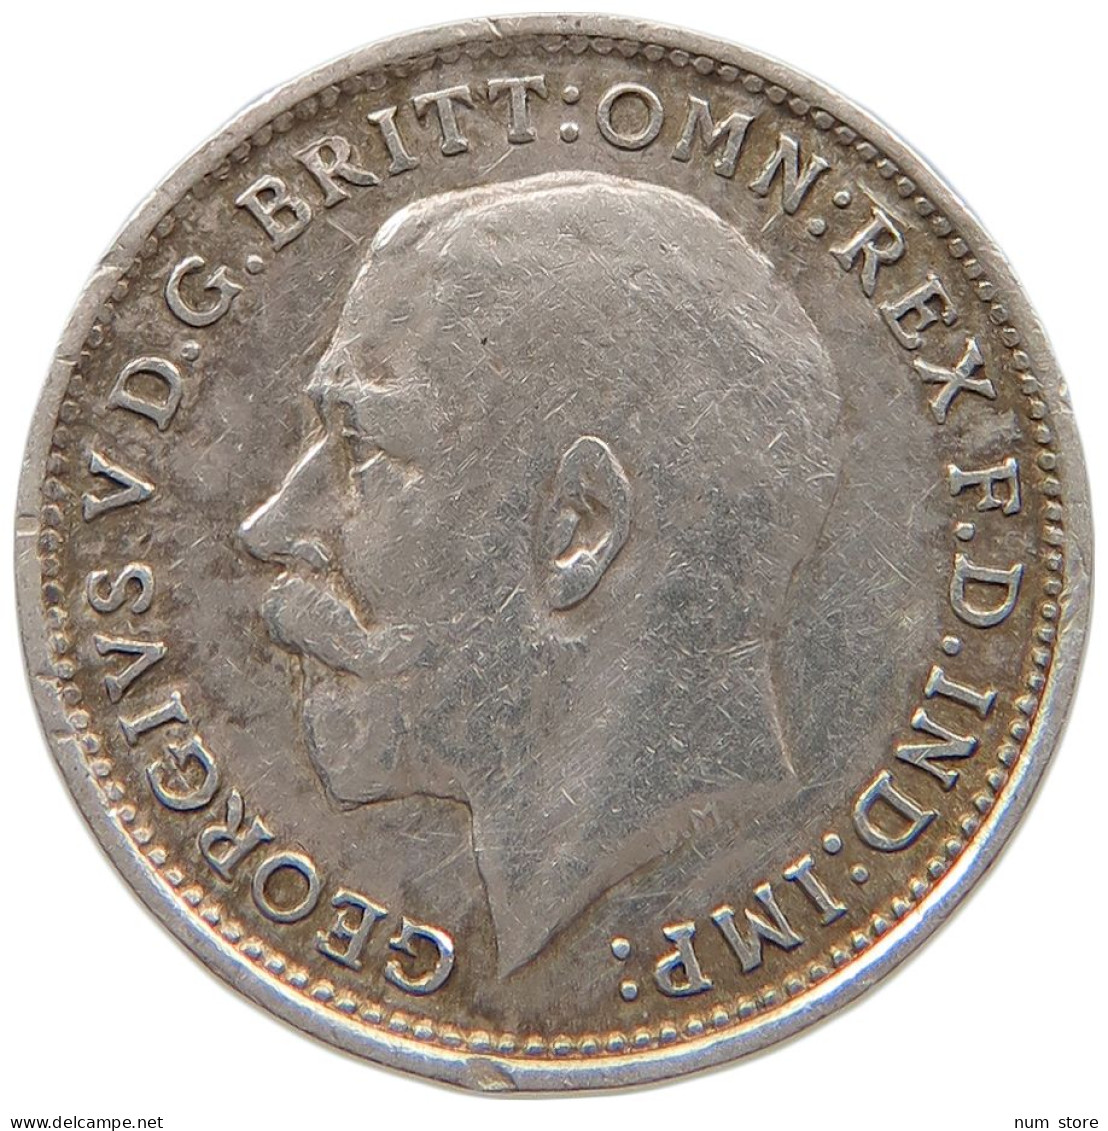 GREAT BRITAIN THREEPENCE 1917 George V. (1910-1936) #t158 0433 - F. 3 Pence